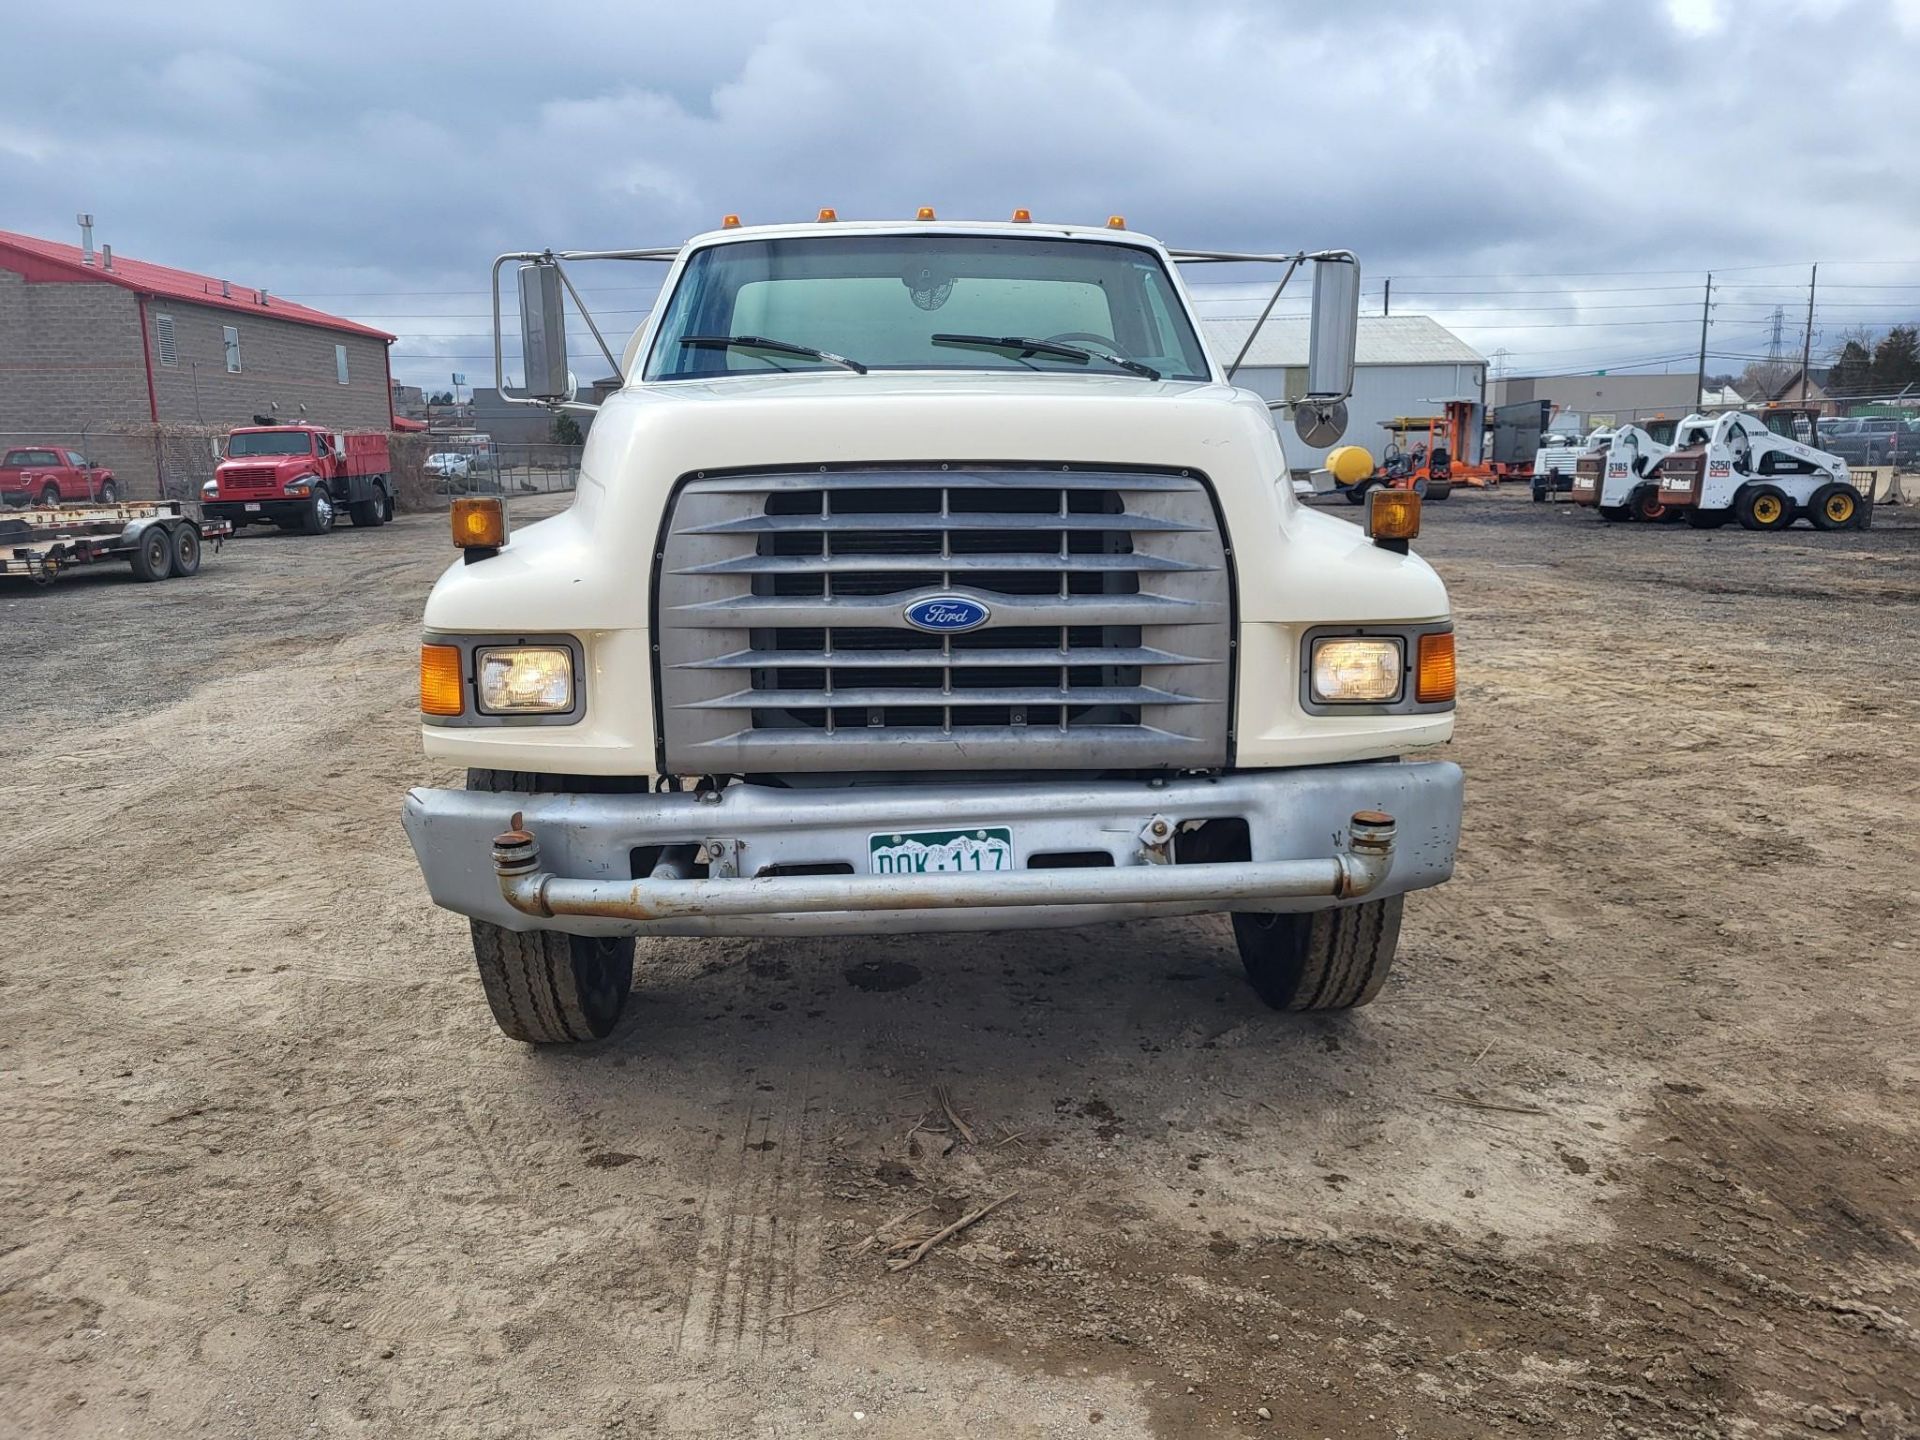 1995 FORD F800 WATER TRUCK - Image 2 of 20